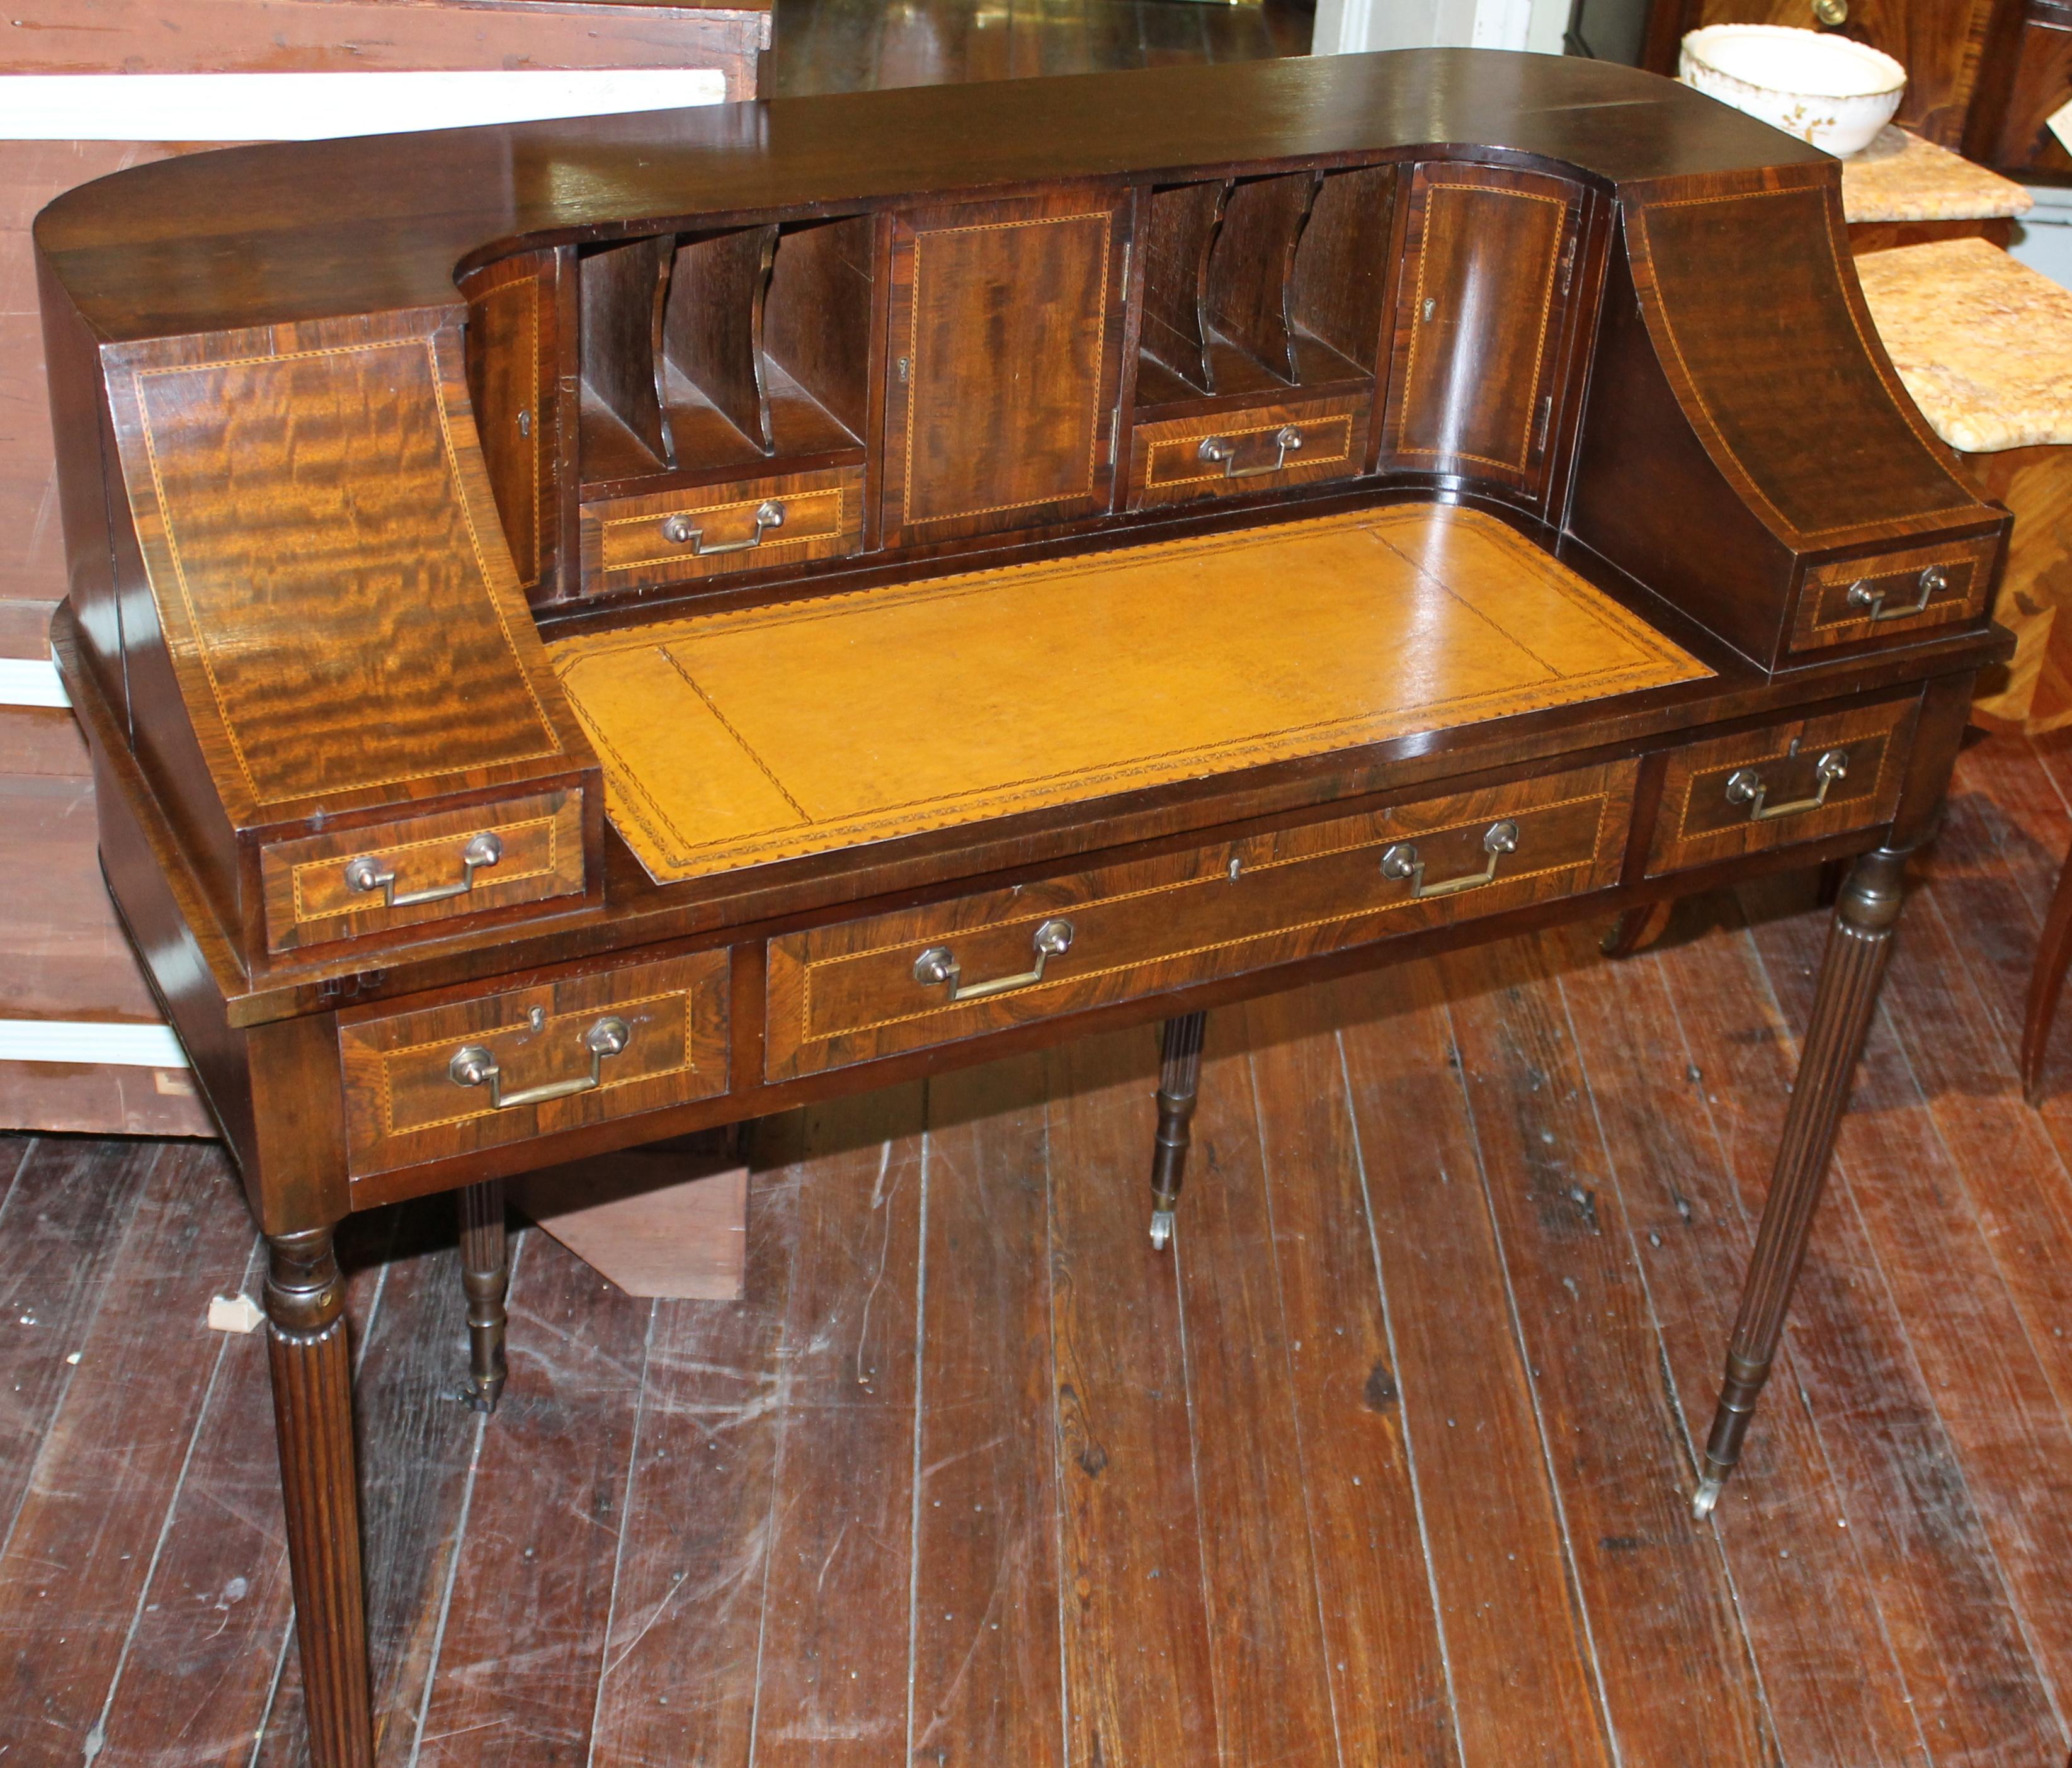 Rare and fine Old English inlaid mahogany leather top Carlton House desk; fitted drawers and pigeon holes. Hand dovetailed mahogany lined drawers. Handsome reeded round and tapered legs. Tan tooled leather hide writing surface.

Measures: 25